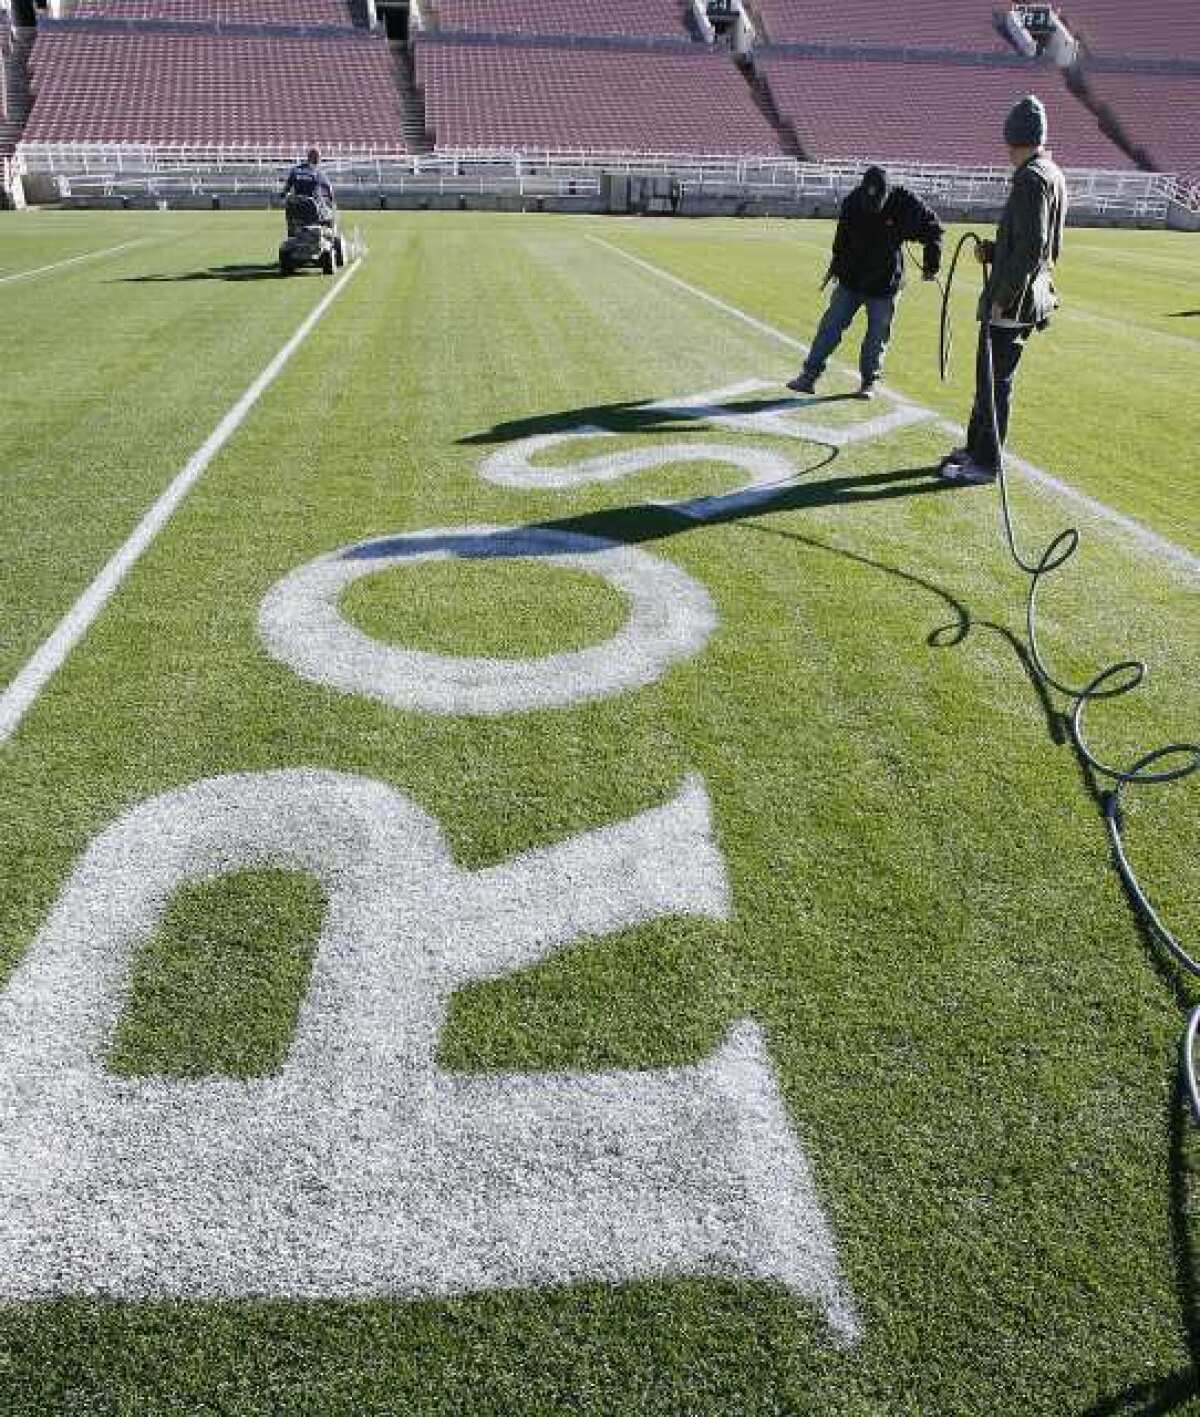 ROSE is painted on the field, part of the artwork at the 50-yard-line, at the Rose Bowl stadium in Pasadena. Everything that goes into preparing for the upcoming Rose Bowl football game takes place on a schedule and behind the scenes.